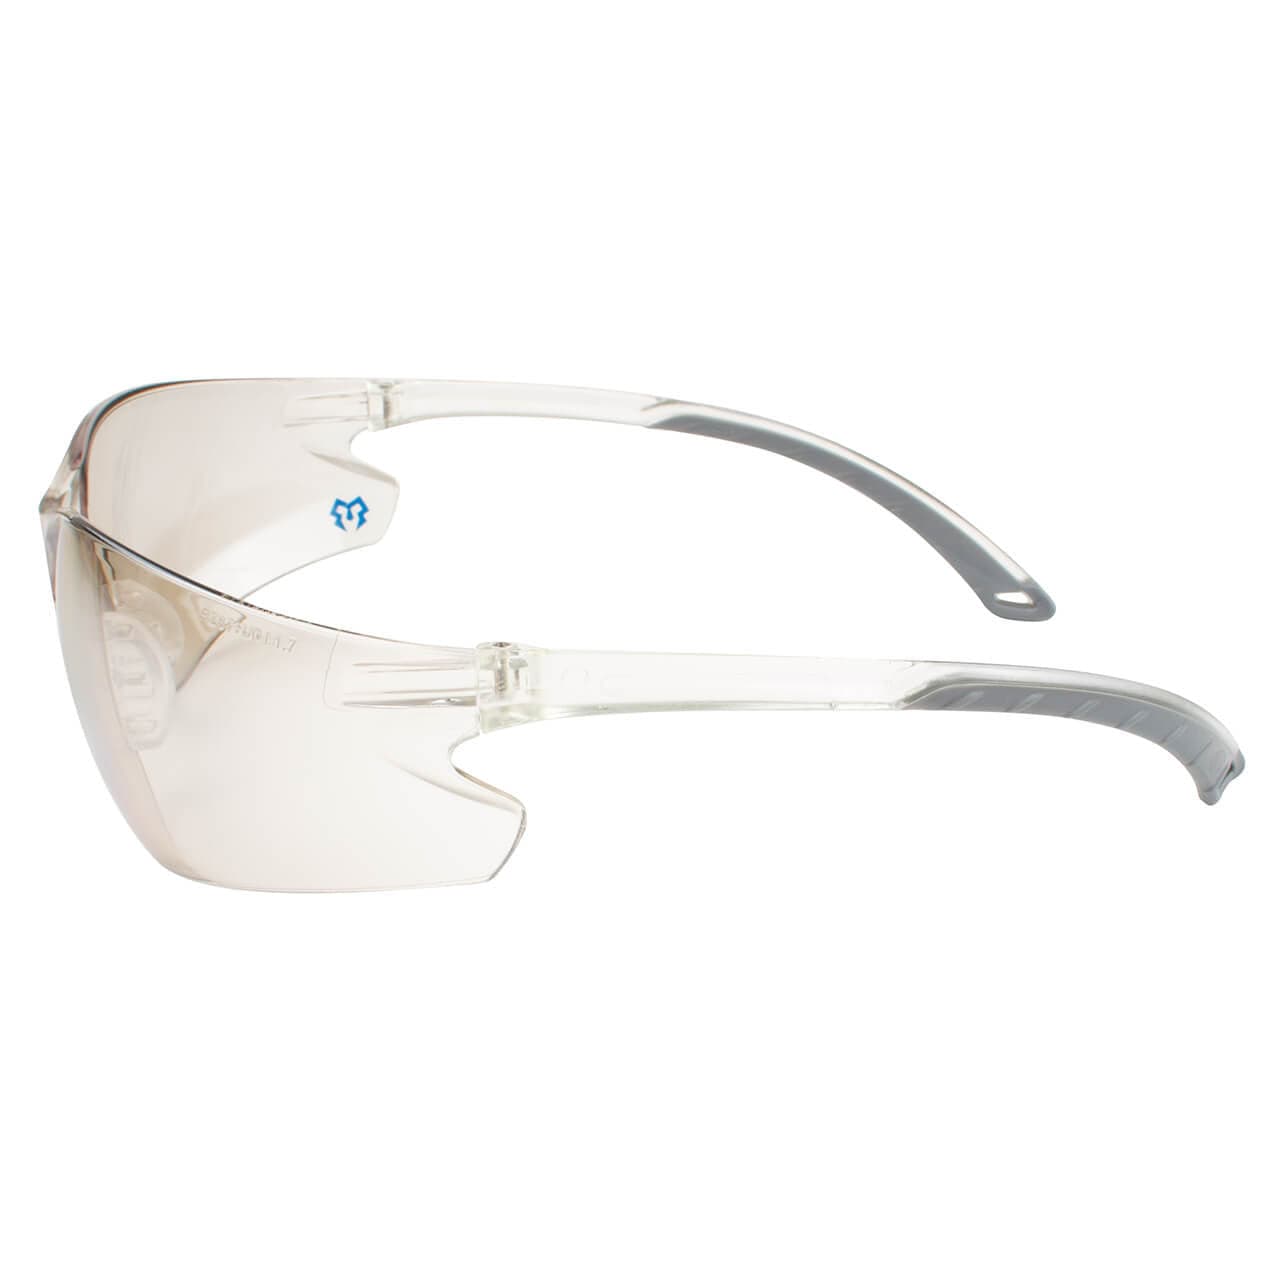 Metel M20 Safety Glasses with Indoor/Outdoor Mirror Lenses Side View